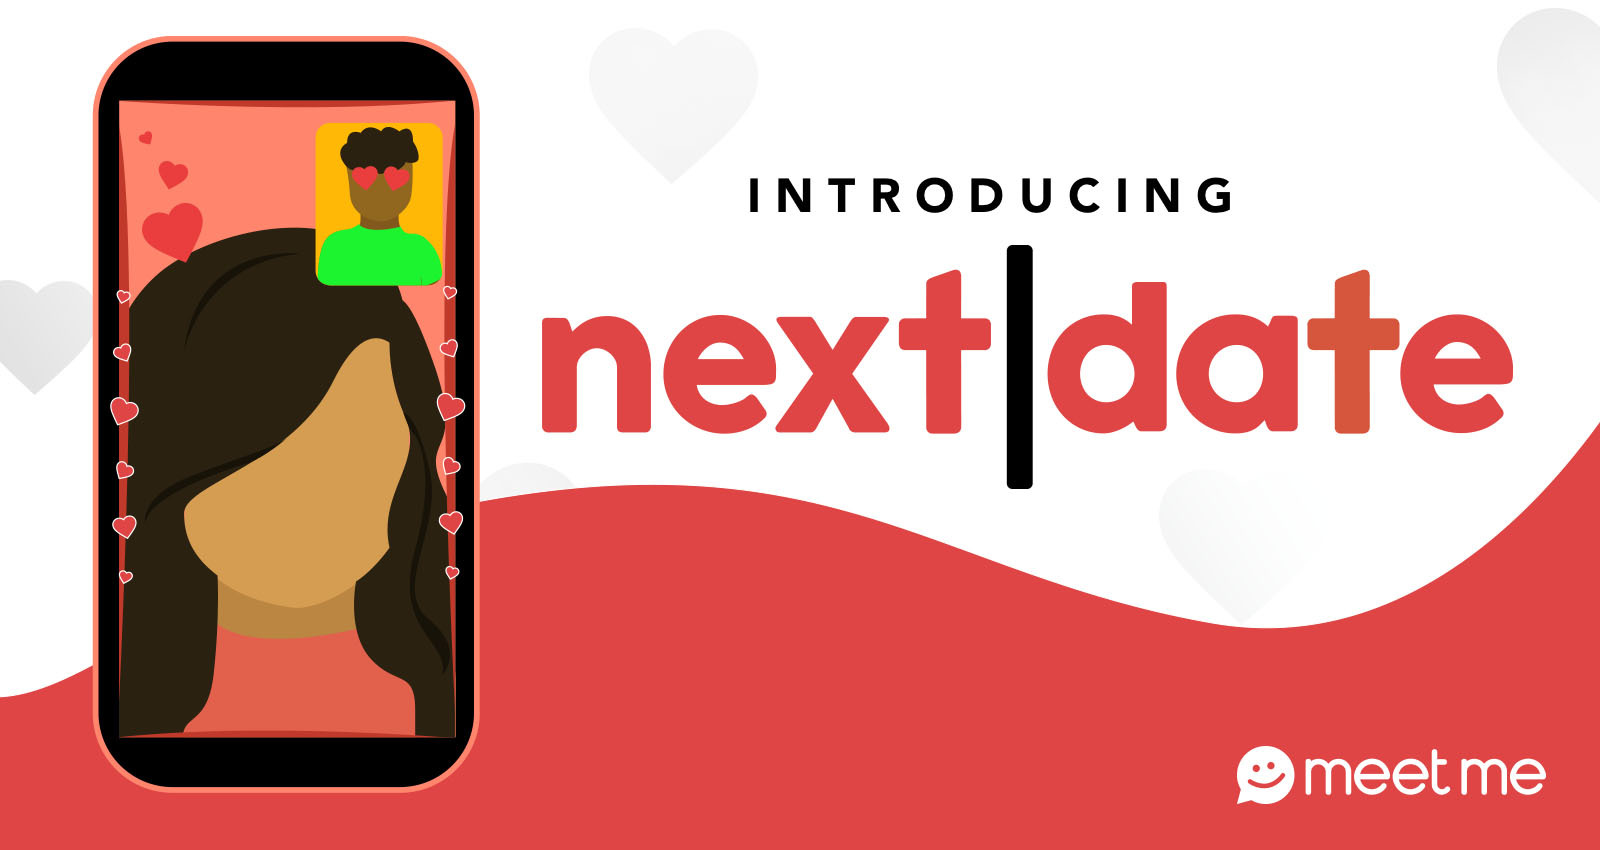 What is nextdate on pof?